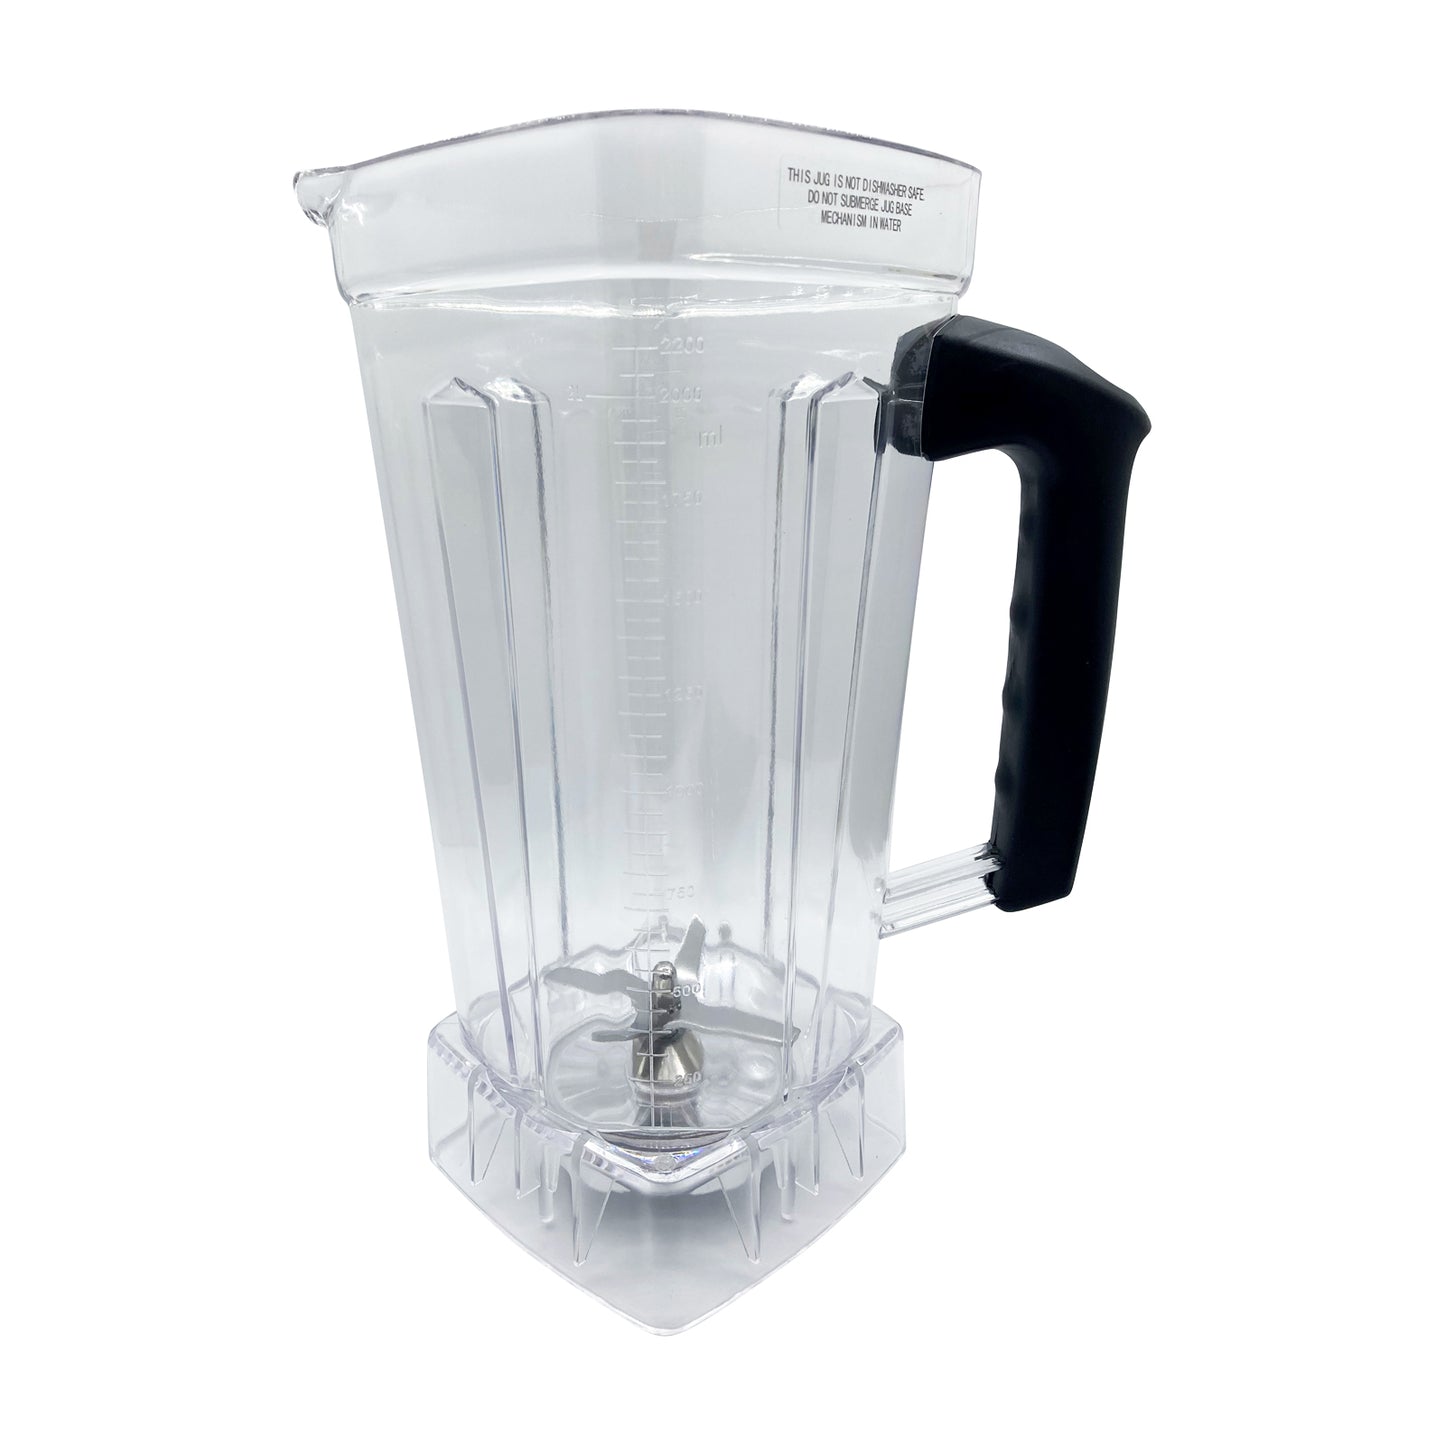 D&A HEALTH - ULTIMATE TURBO BLENDER - 2,000ML JUG REPLACEMENT - STANDARD SQUARE